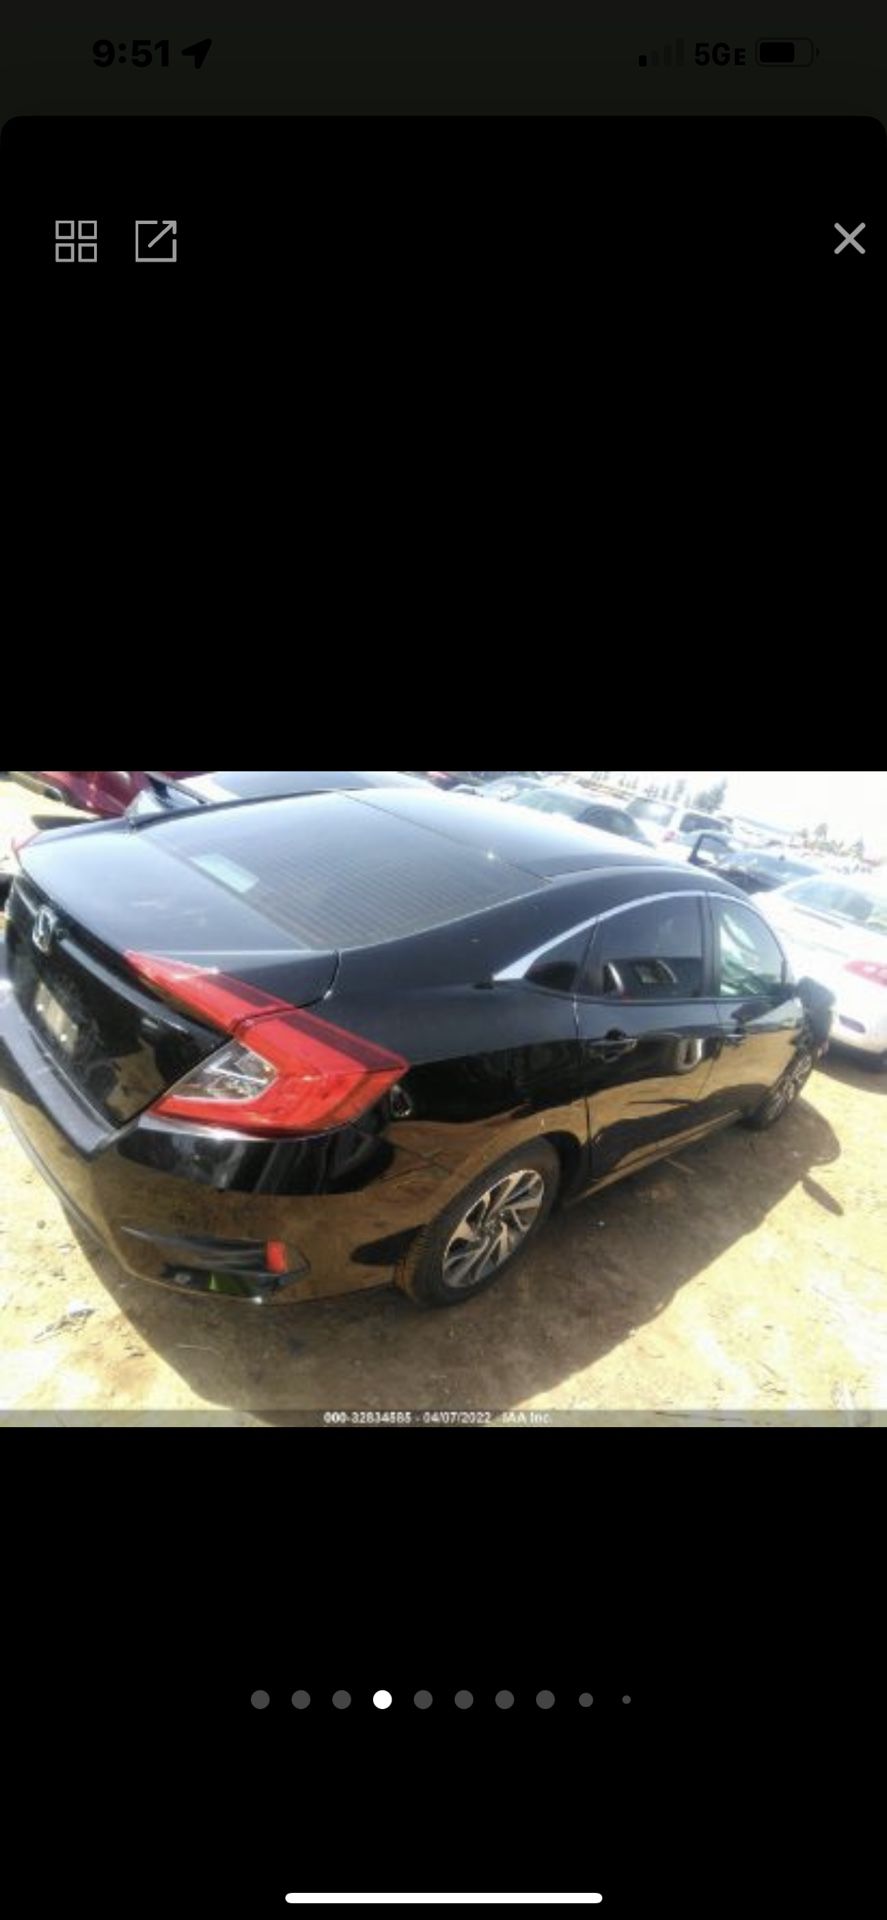 2016 Civic Ex Salvage Runs And Drives 90xxxx Miles Sale As Is Passes Smog 7300 I Got Fender Just Need Bumper (contact info removed) Interested Call